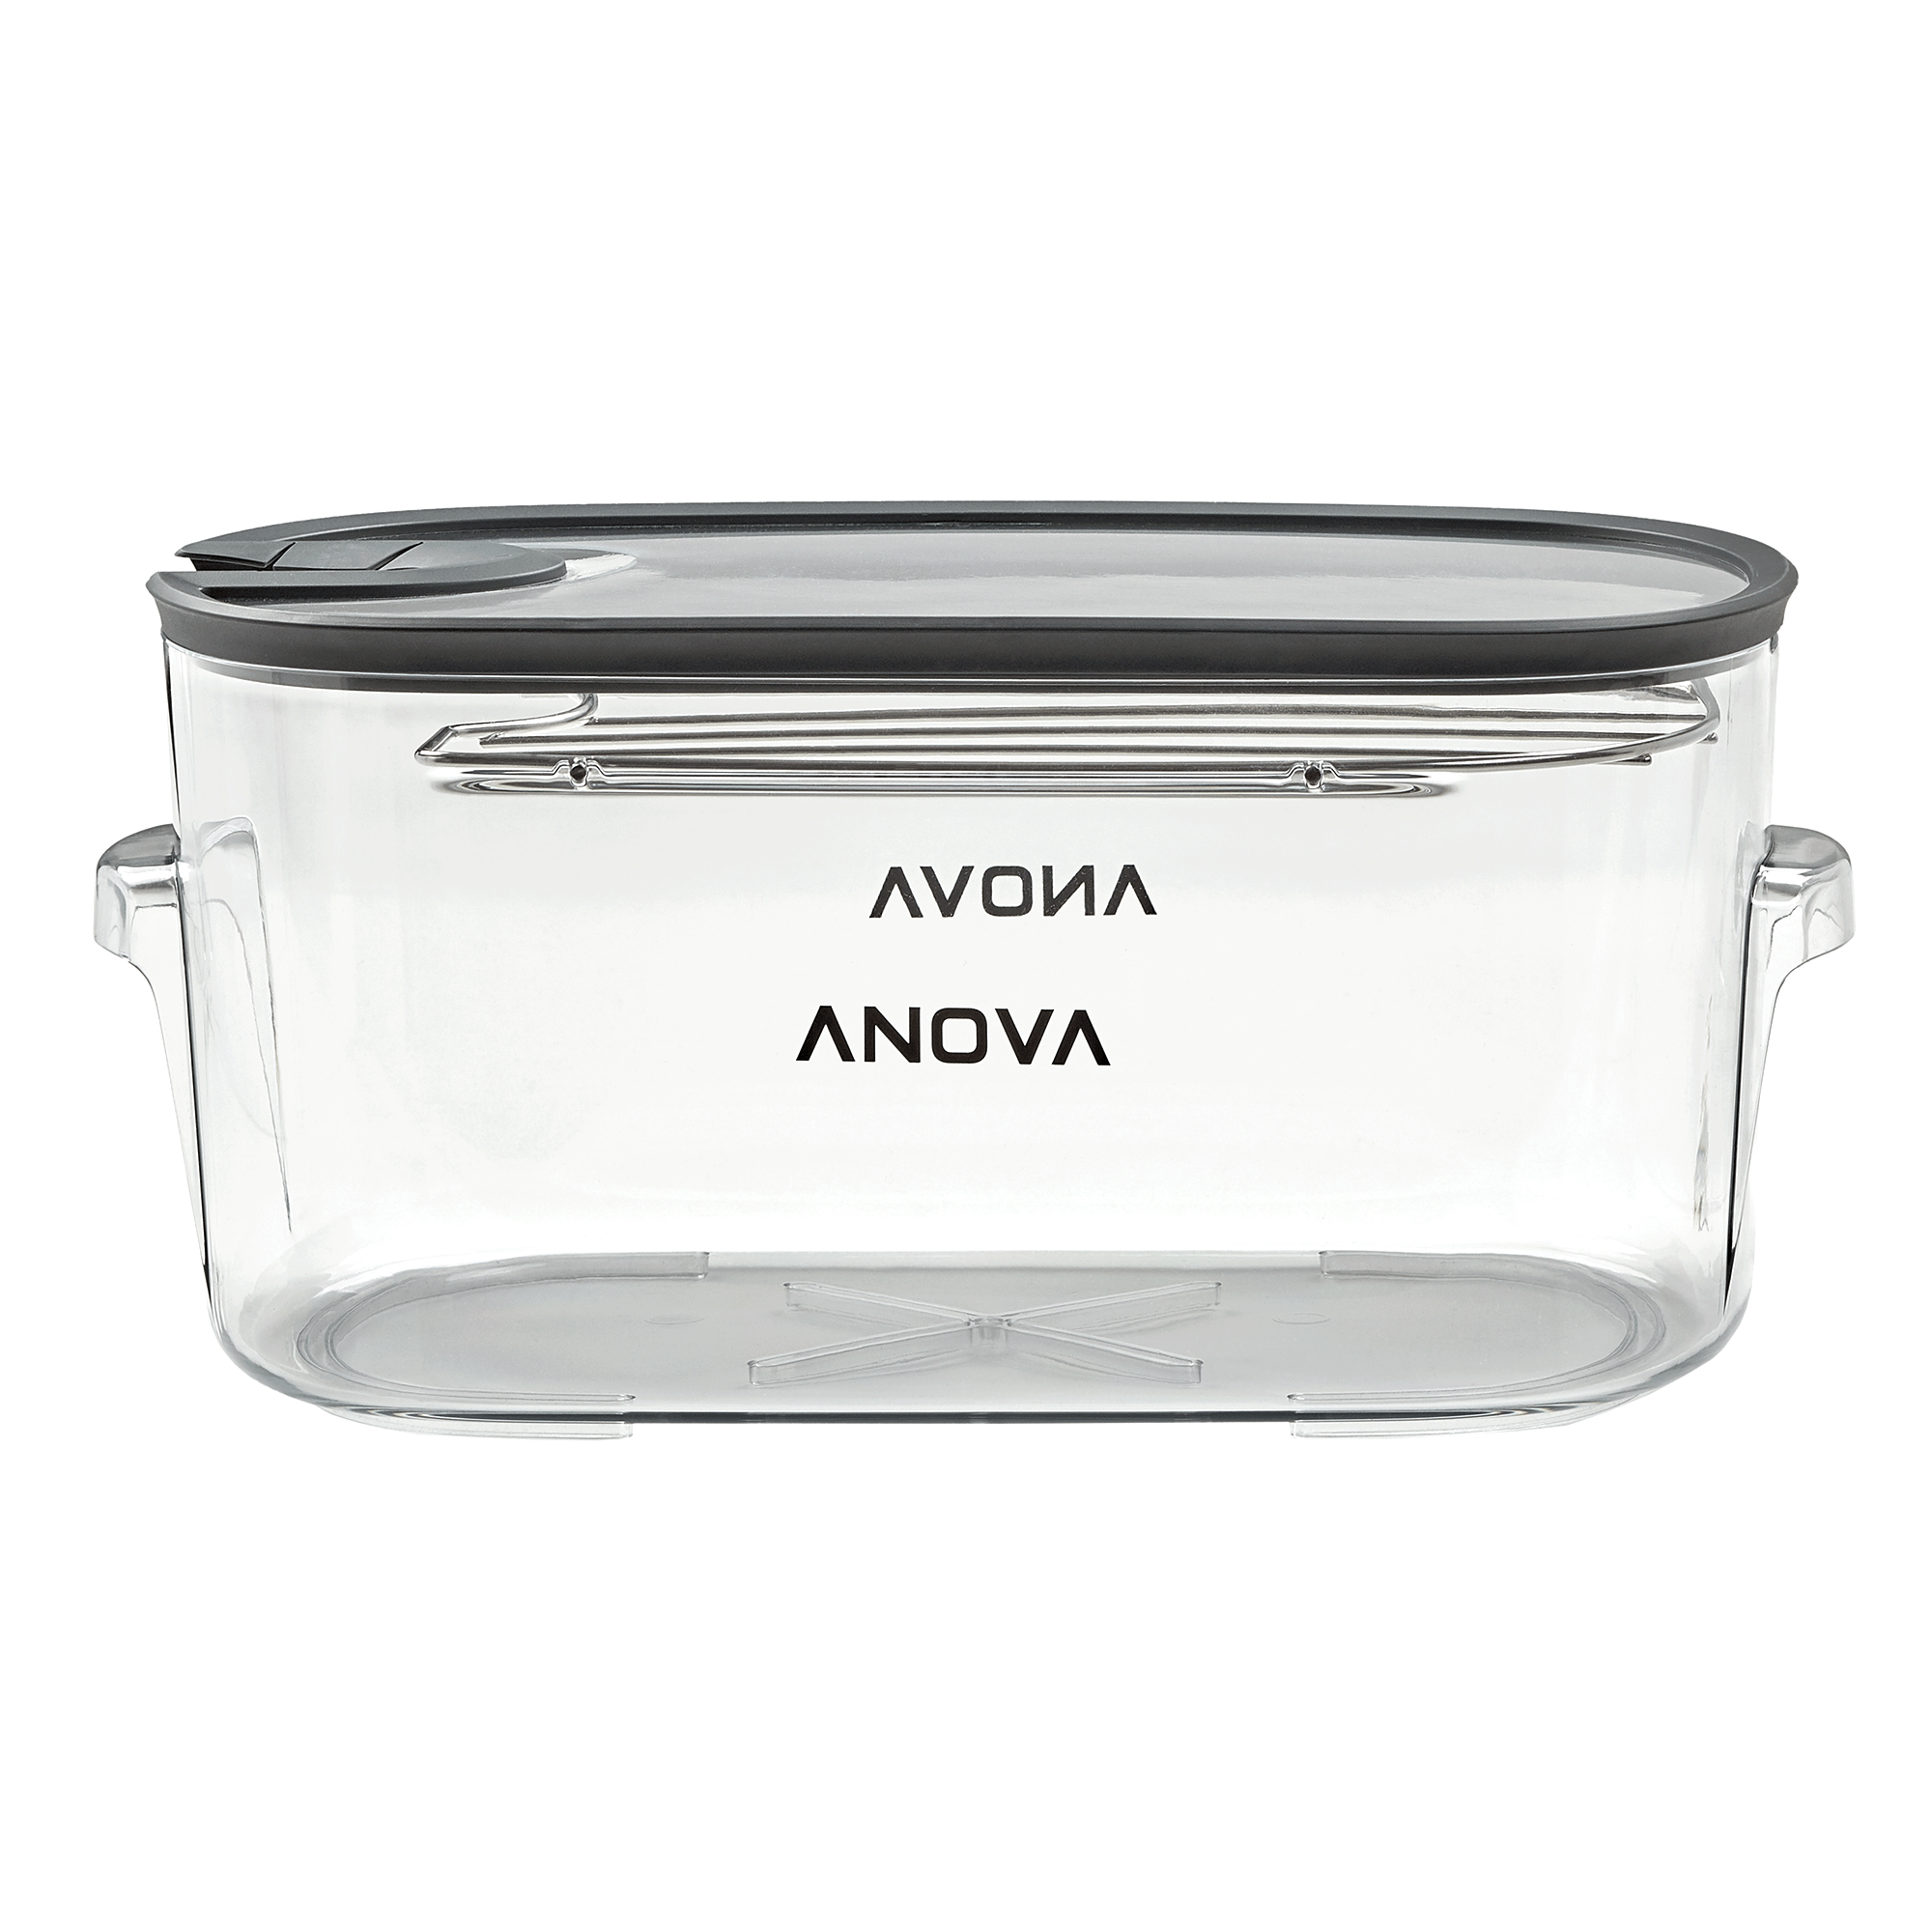  Anova Culinary ANTC01 Sous Vide Cooker Cooking